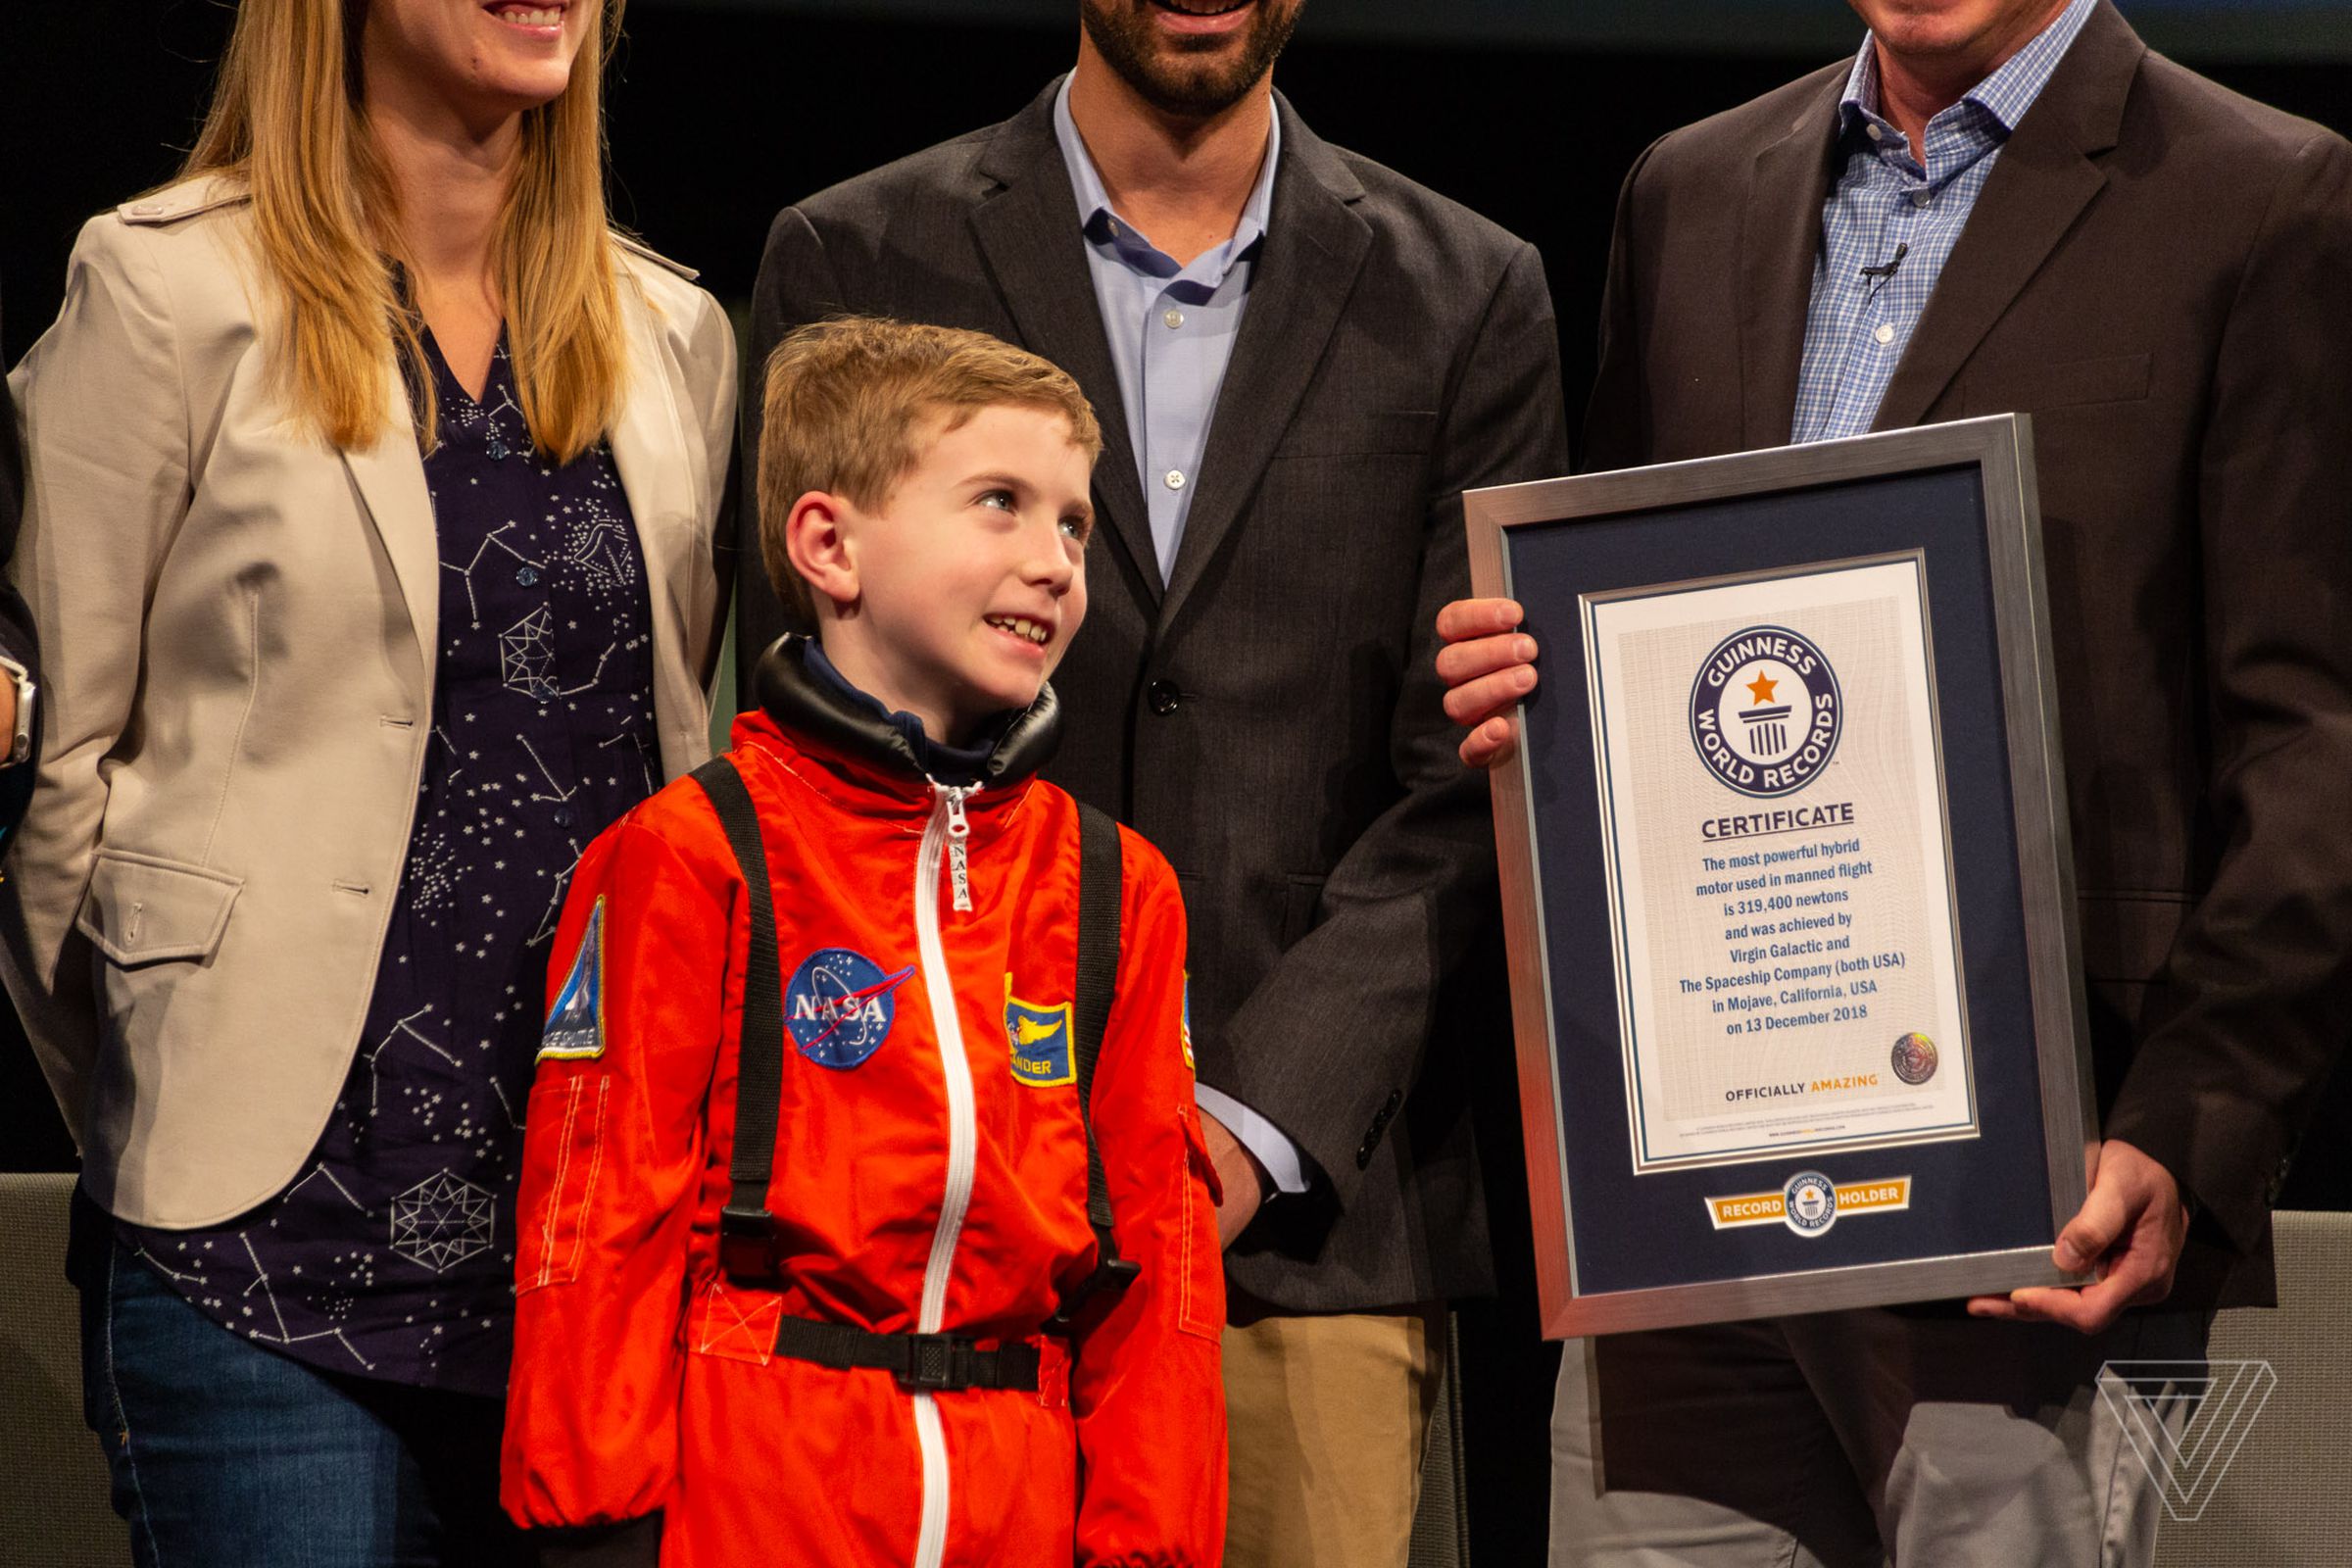 Branson invited a young boy in an astronaut suit to pose for pictures at the museum.